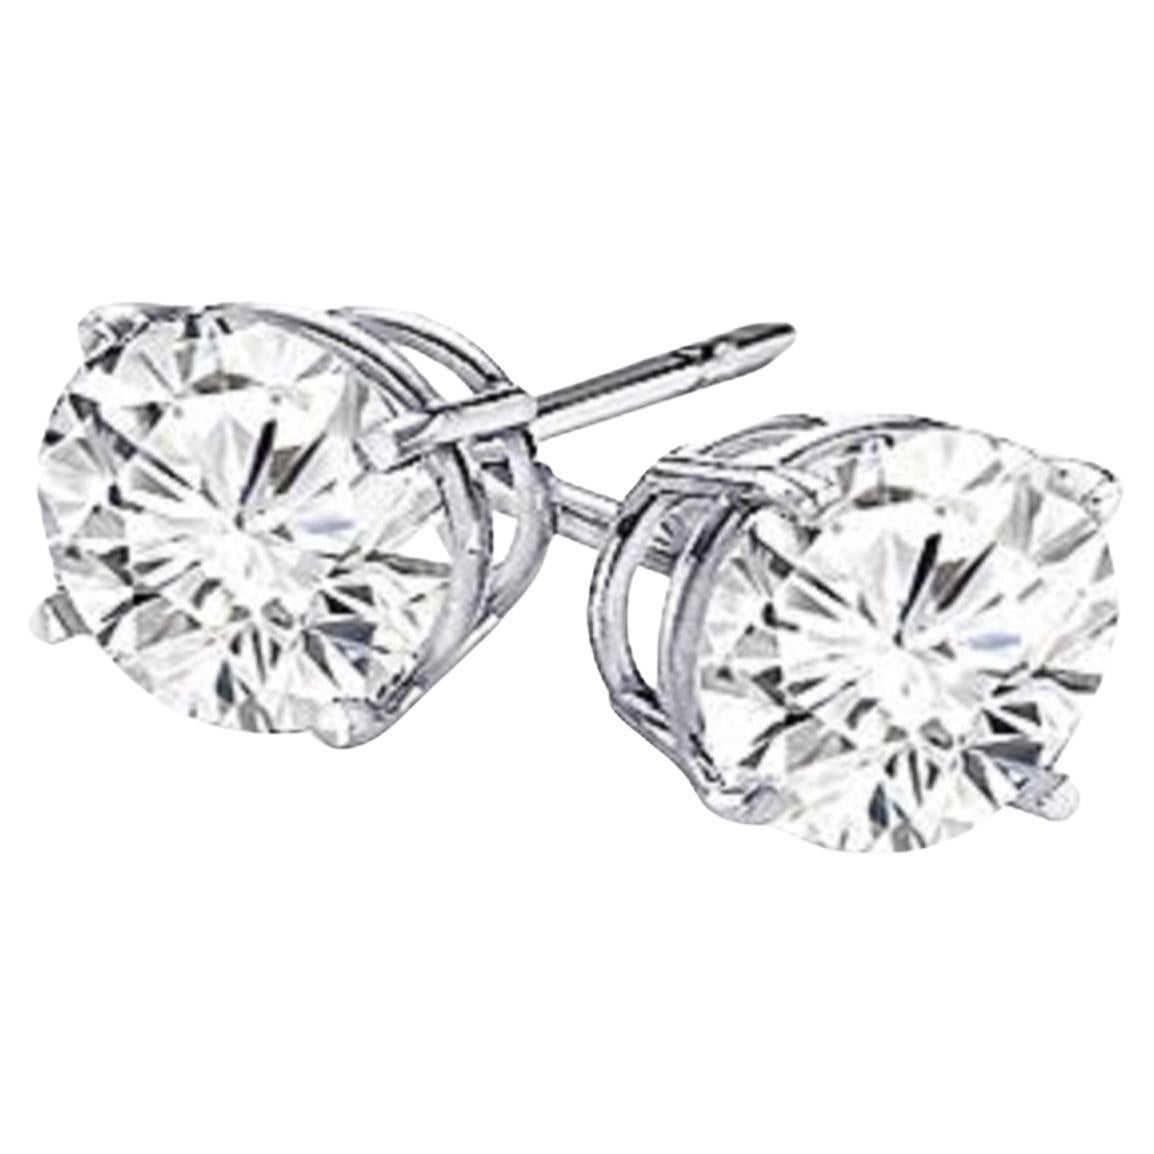 Certified Lab Round Cut 1.50 - 4.00 Carat Diamond 4-prong Stud Earrings / F, VS2 For Sale